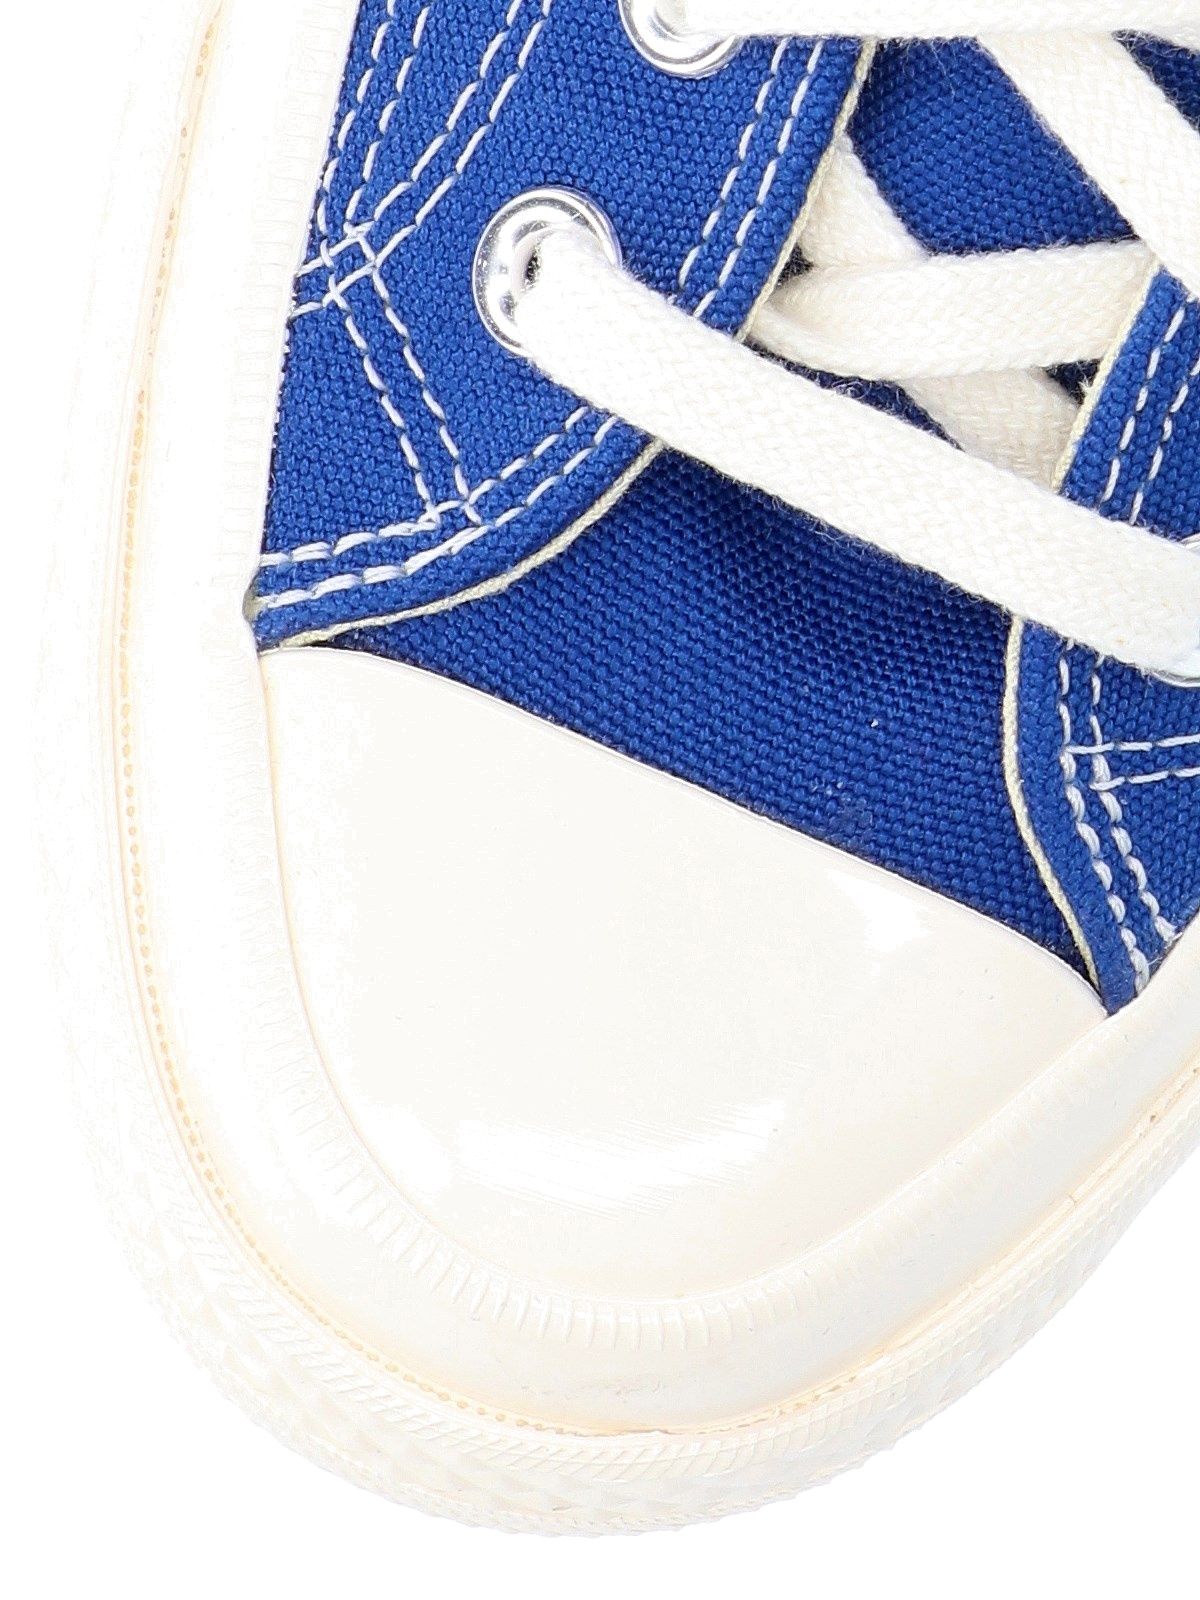 Sneakers High Top "Chuck Taylor"